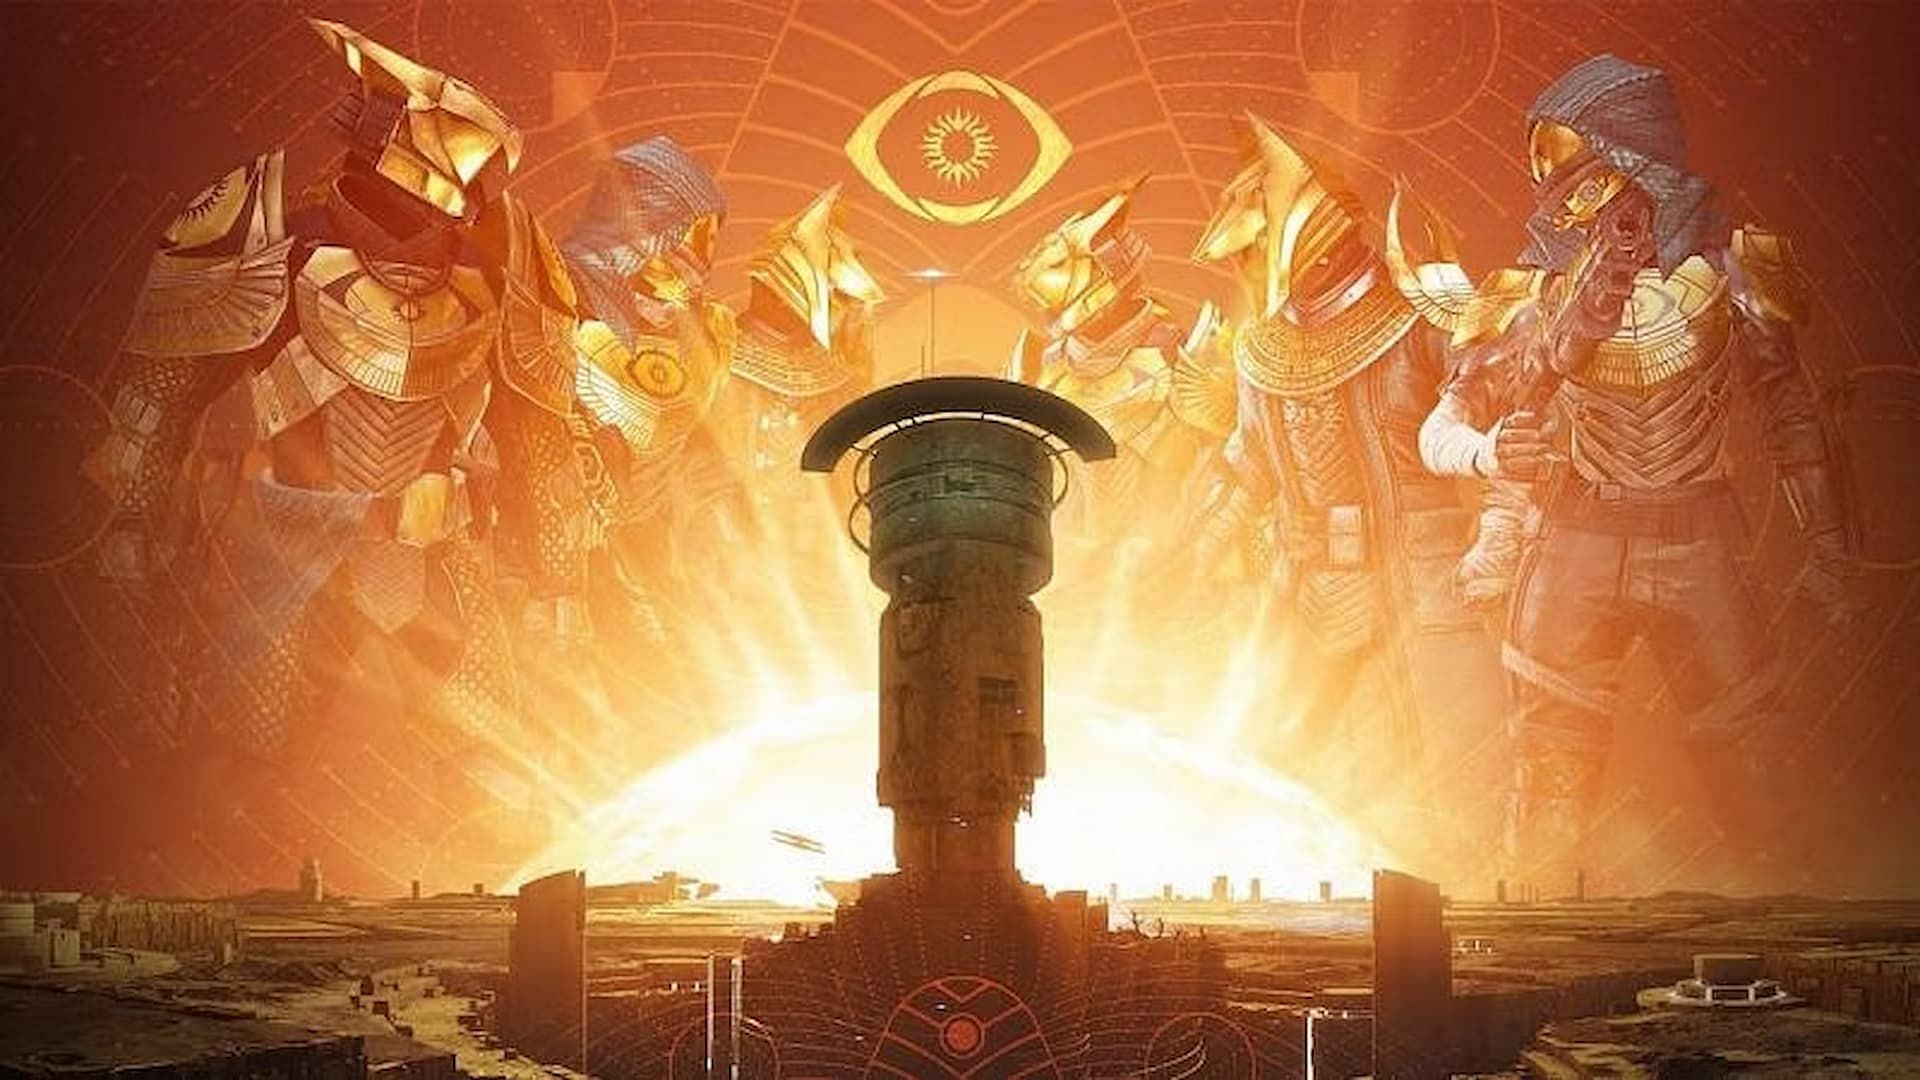 The Lighthouse in Destiny 2 Trials of Osiris (Image via Bungie)